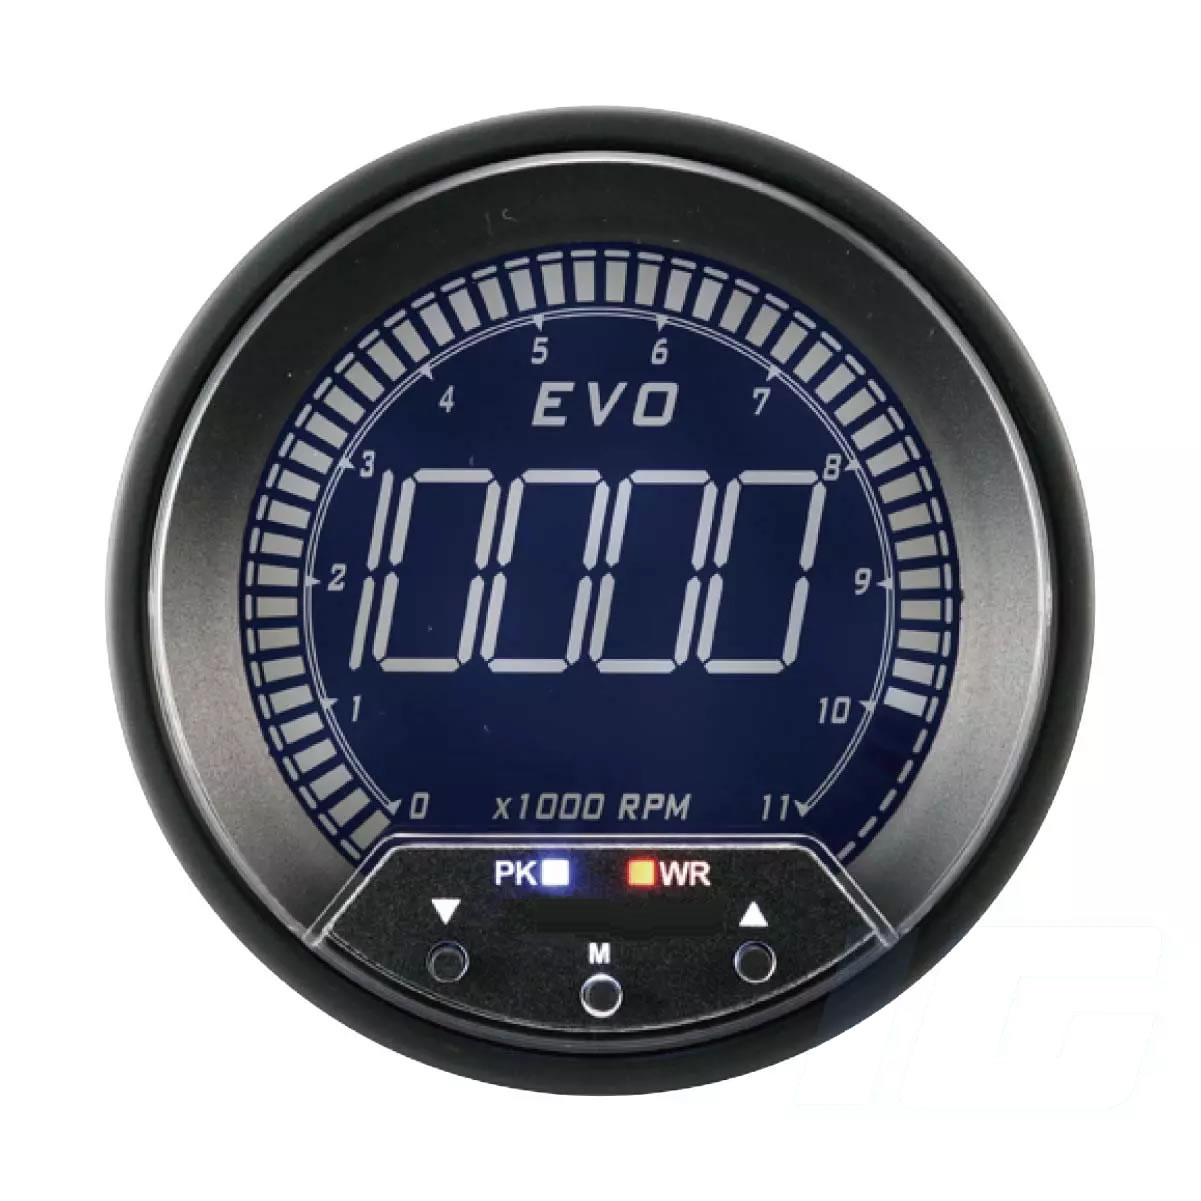 85mm LCD Performance Car Gauges - Tachometer With Warning and Peak For Your Sport Racing Car